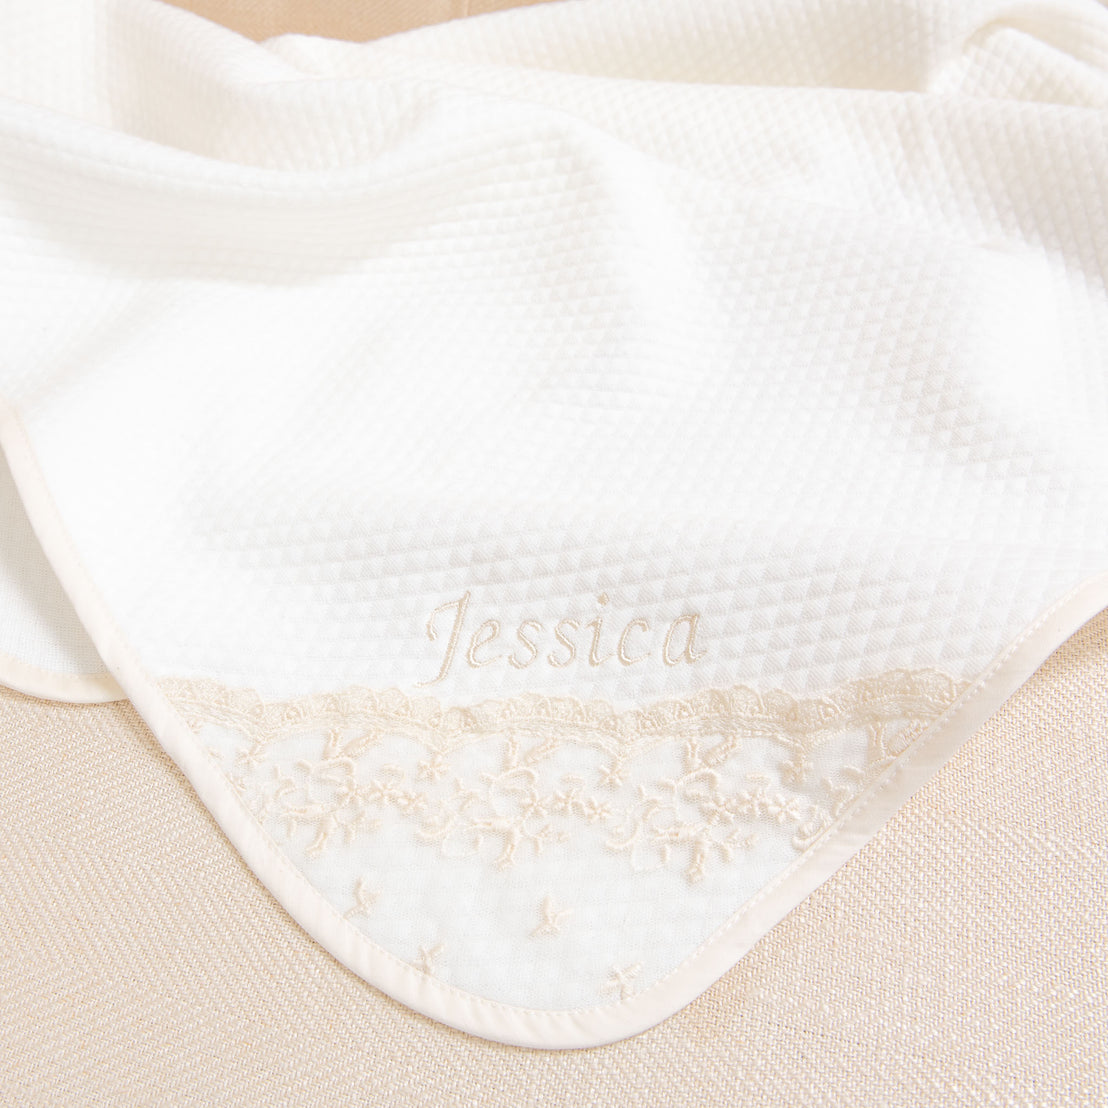 Close-up of the corner of the Jessica Personalized Blanket with the name "Jessica" embroidered and decorative lace detailing along the edge, set against a soft beige background.